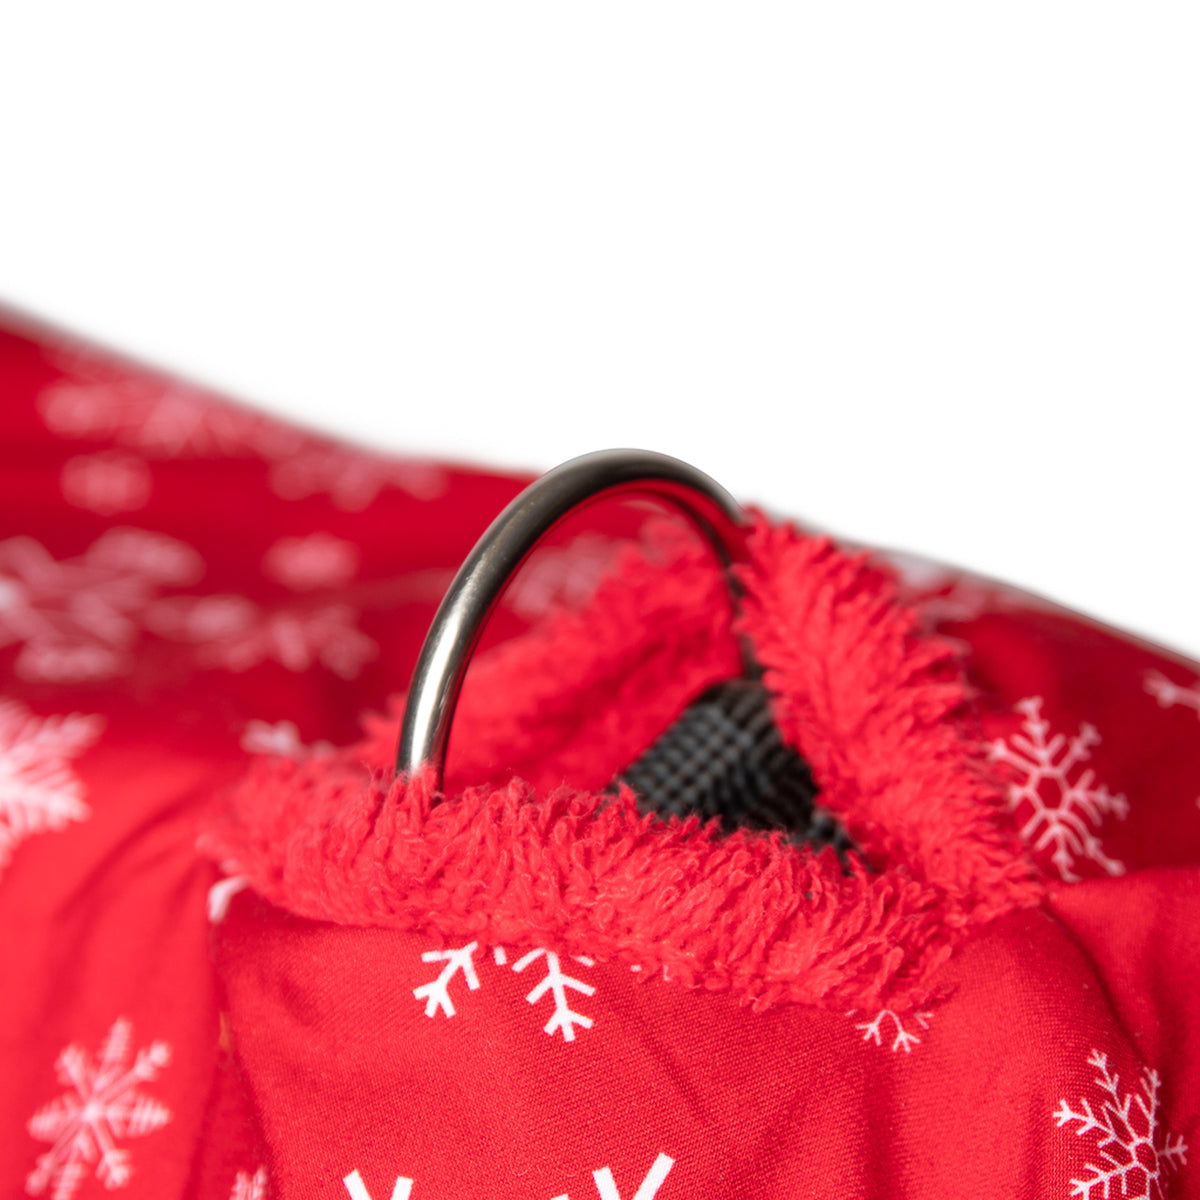 Exclusive collection DogRobe drying coat, with harness access opening in Red Snowflake pattern.